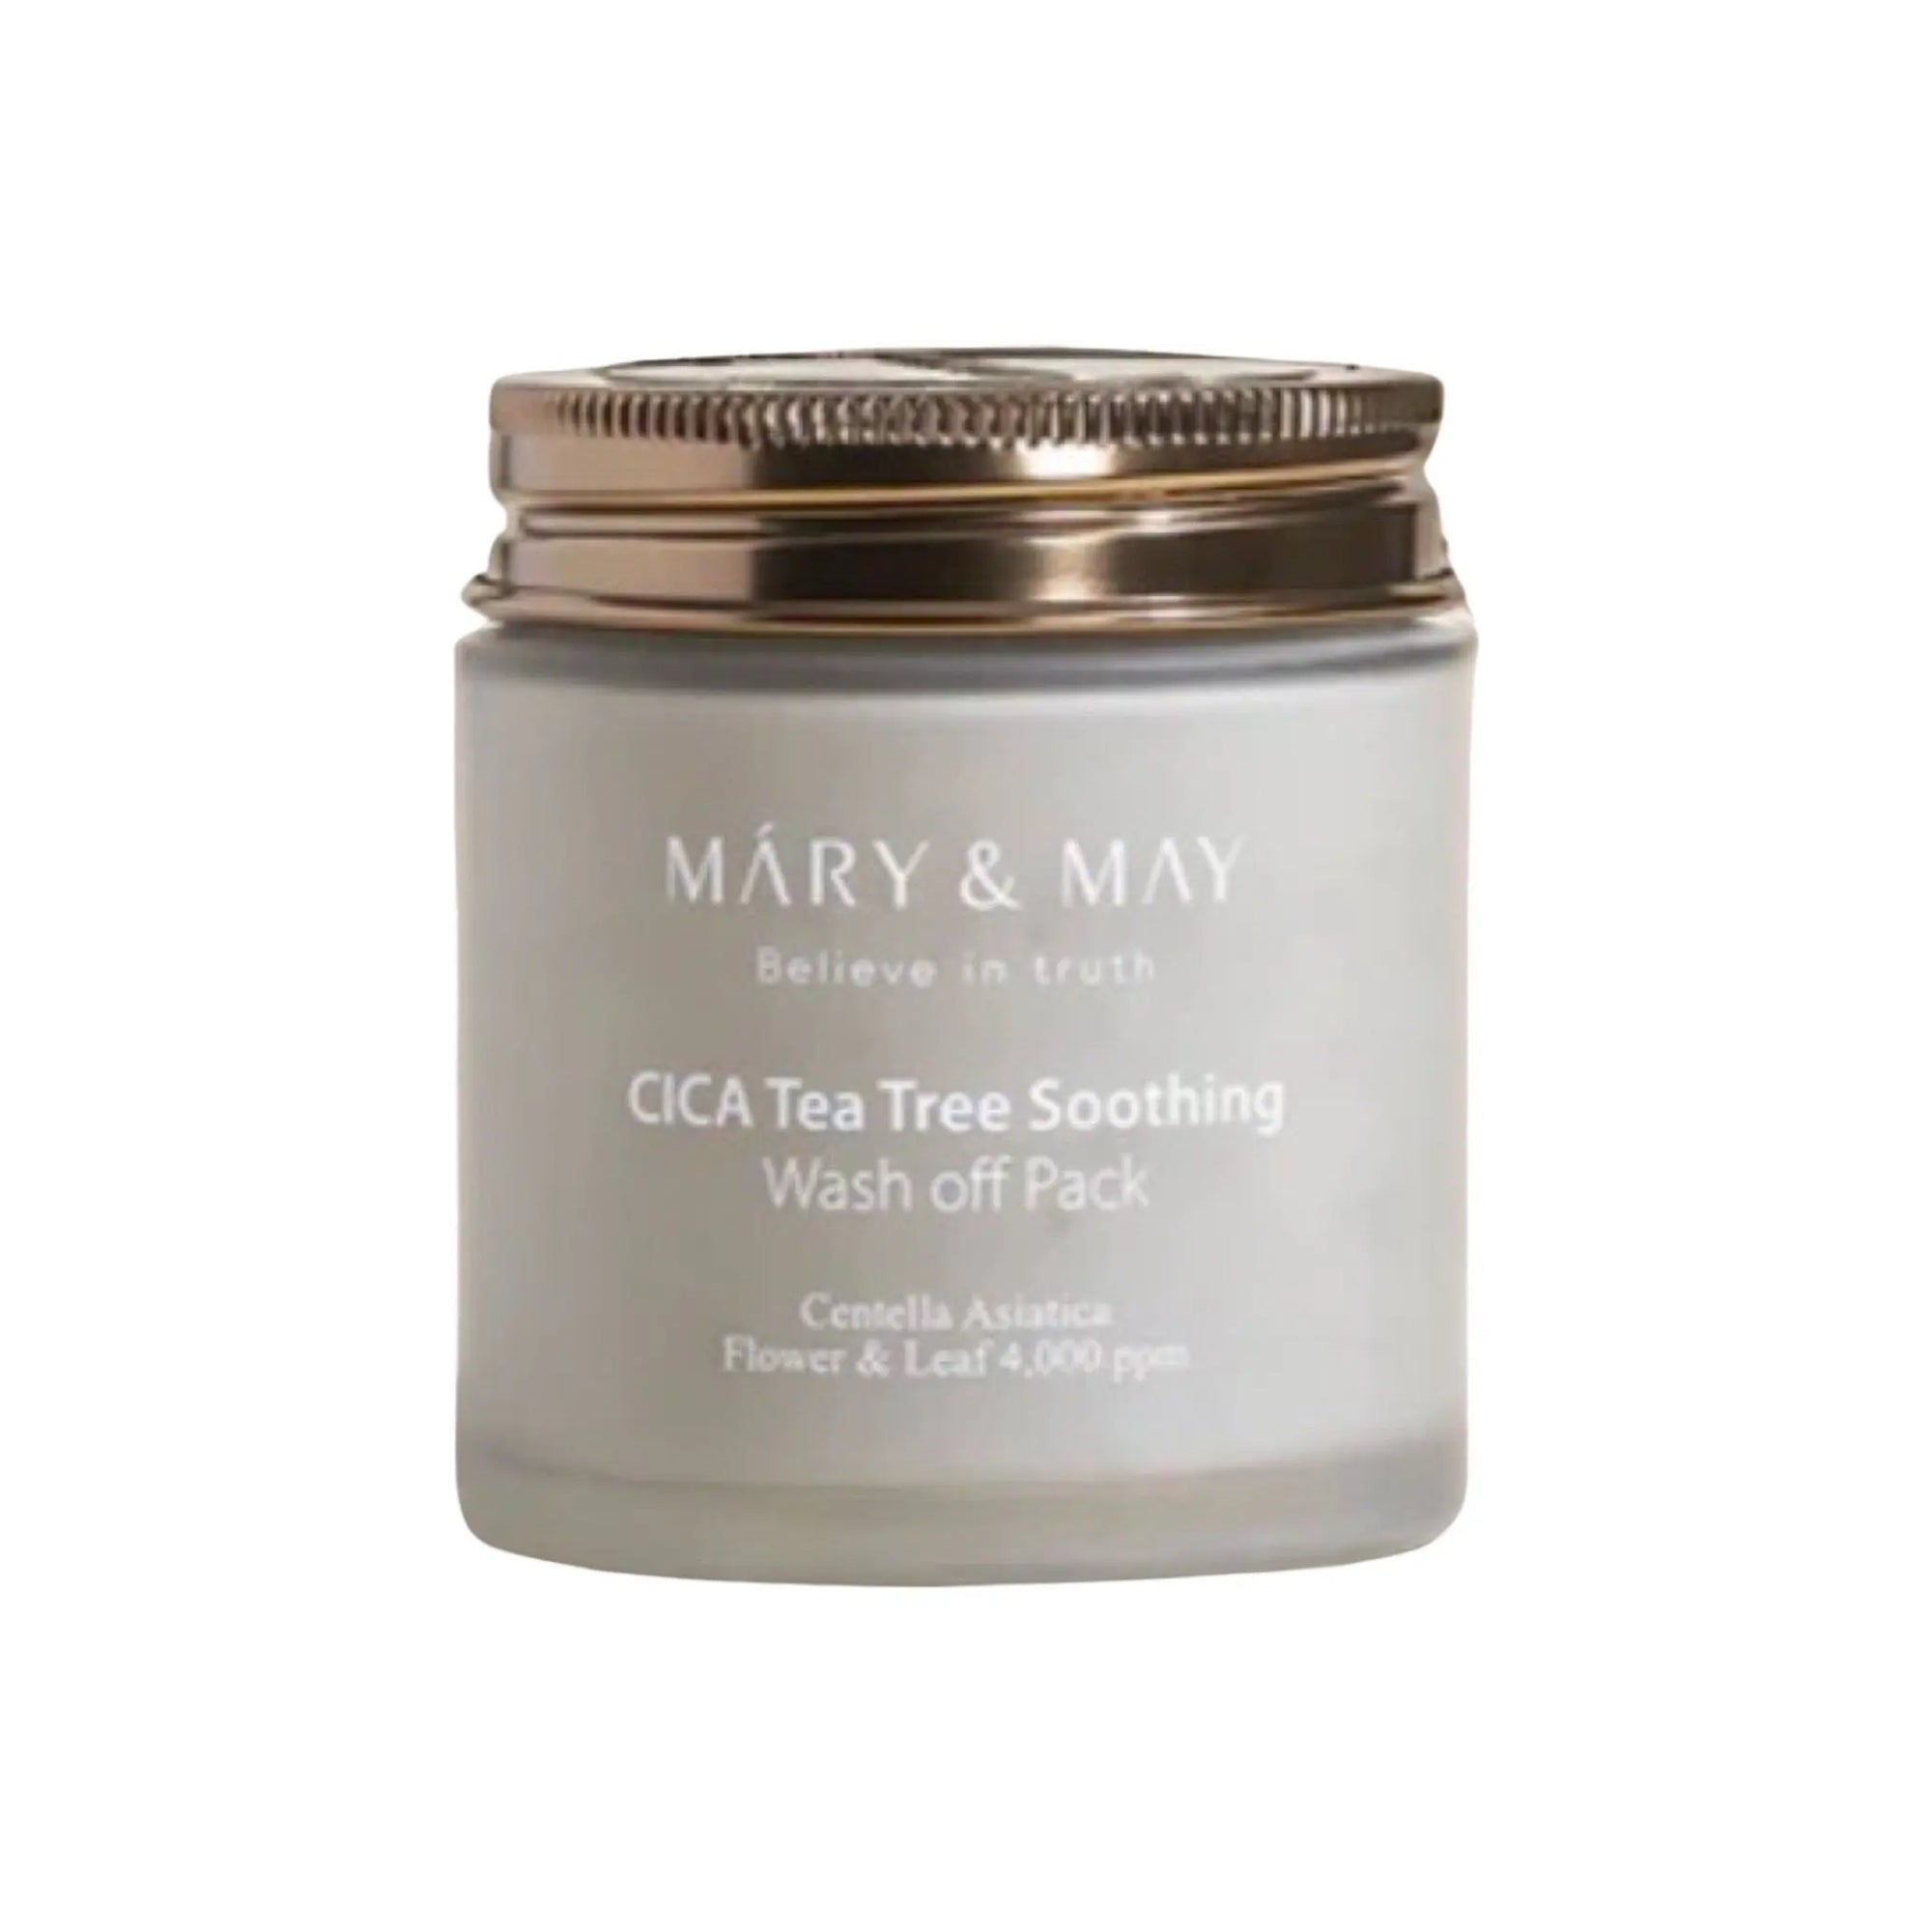 Mary & May- CICA TeaTree Soothing Wash Off Pack Mary & May